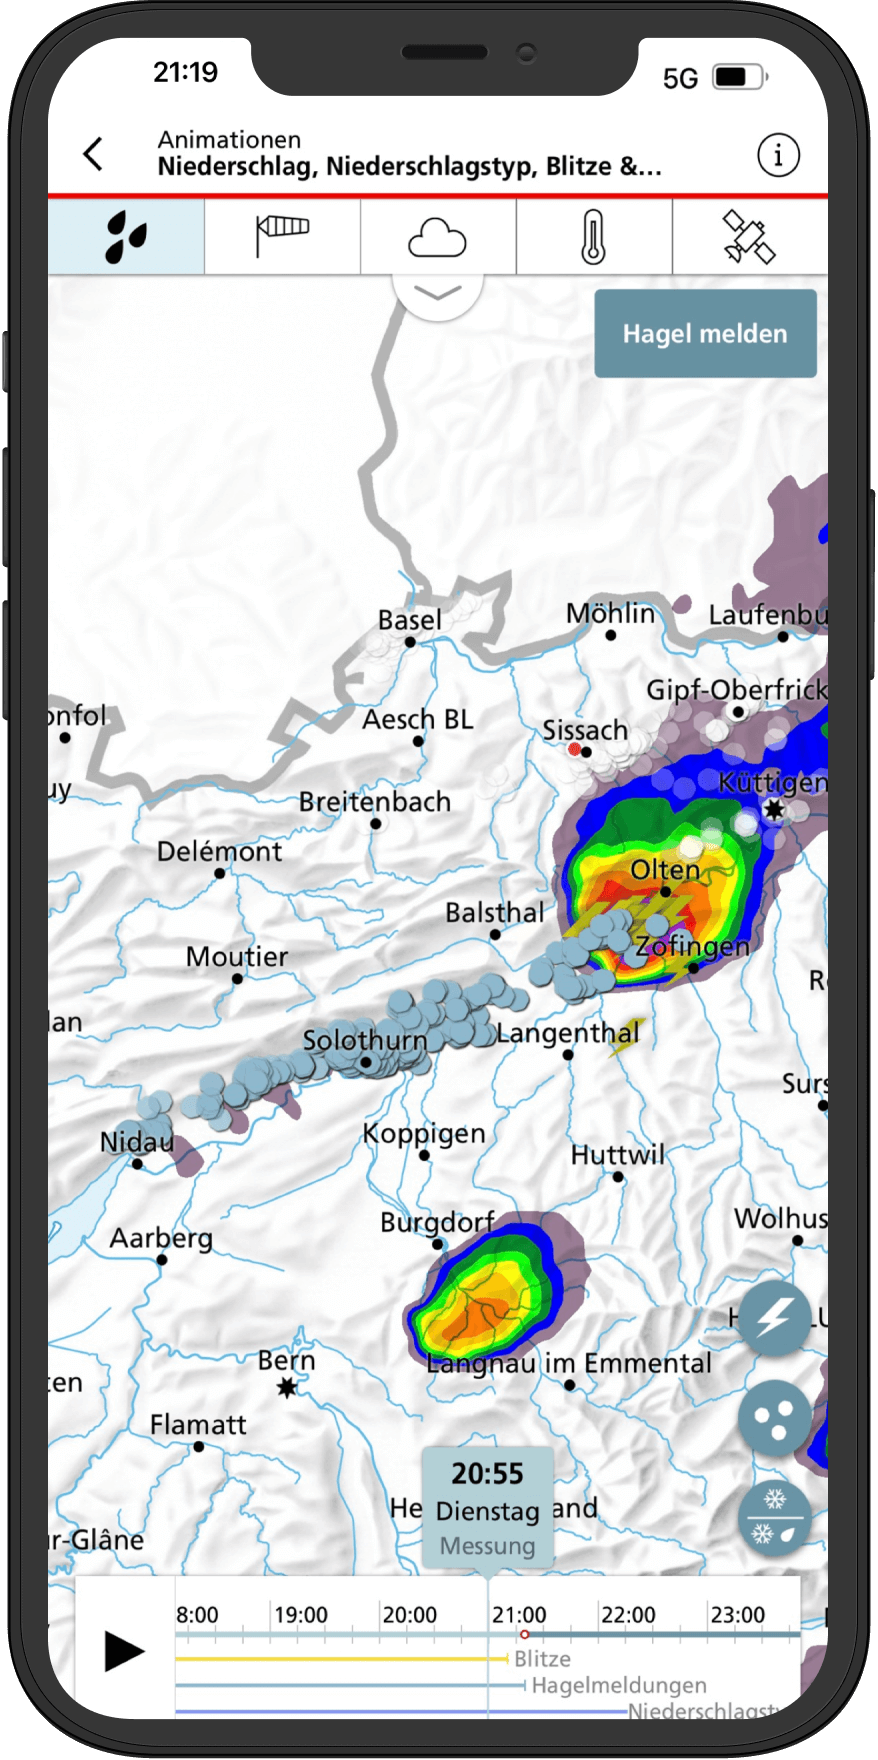 Screenshot of MeteoSwiss 2.0 in 2021. The screen shows a map with markings of hail observations